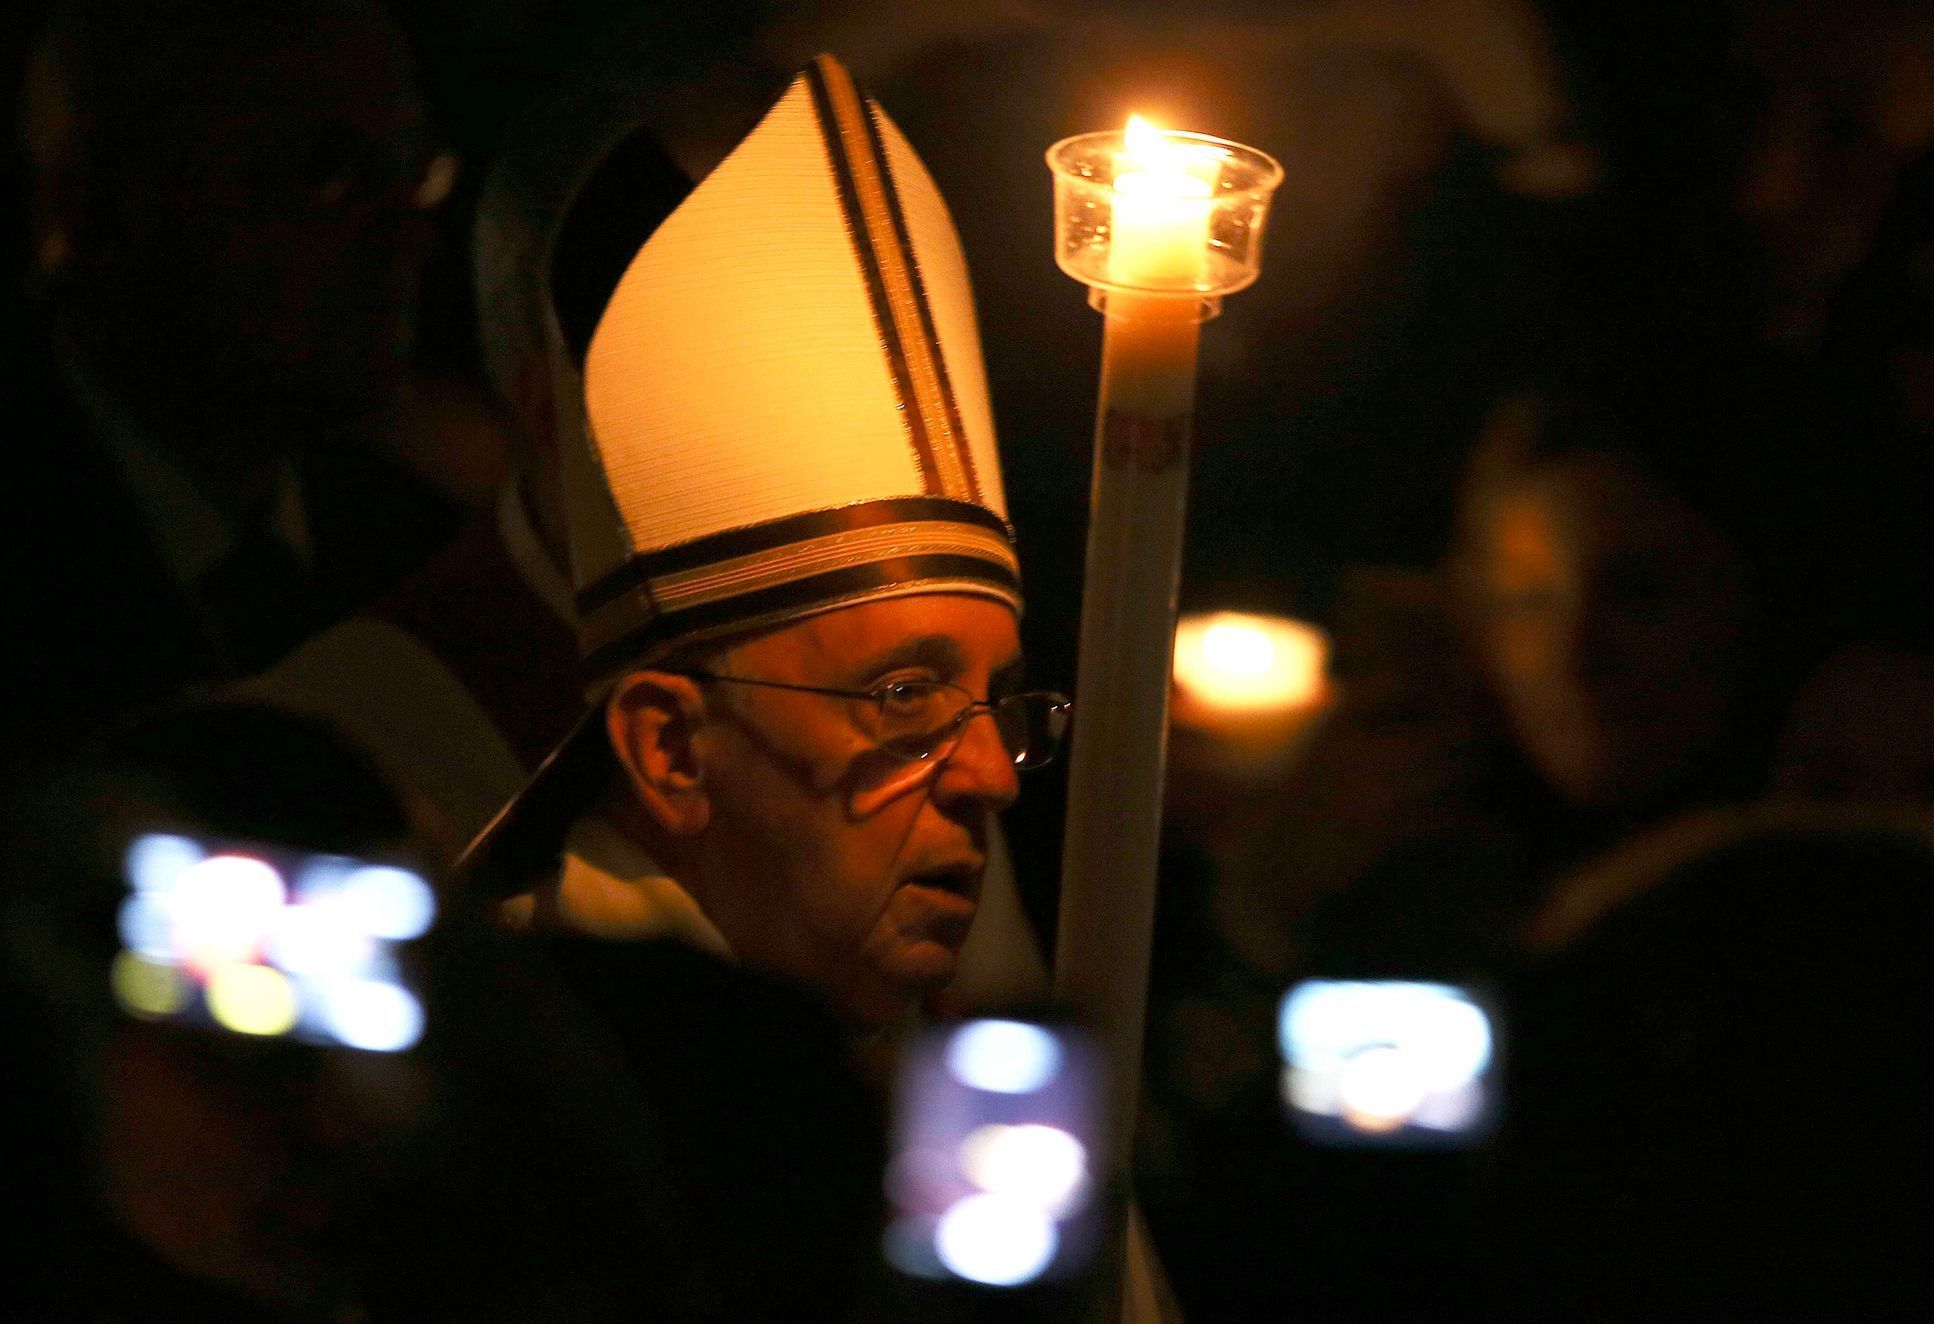 Pope Francis holds a candle as he leads a vigil mass during Easter celebrations at St. Peter's Basilica in the Vatican